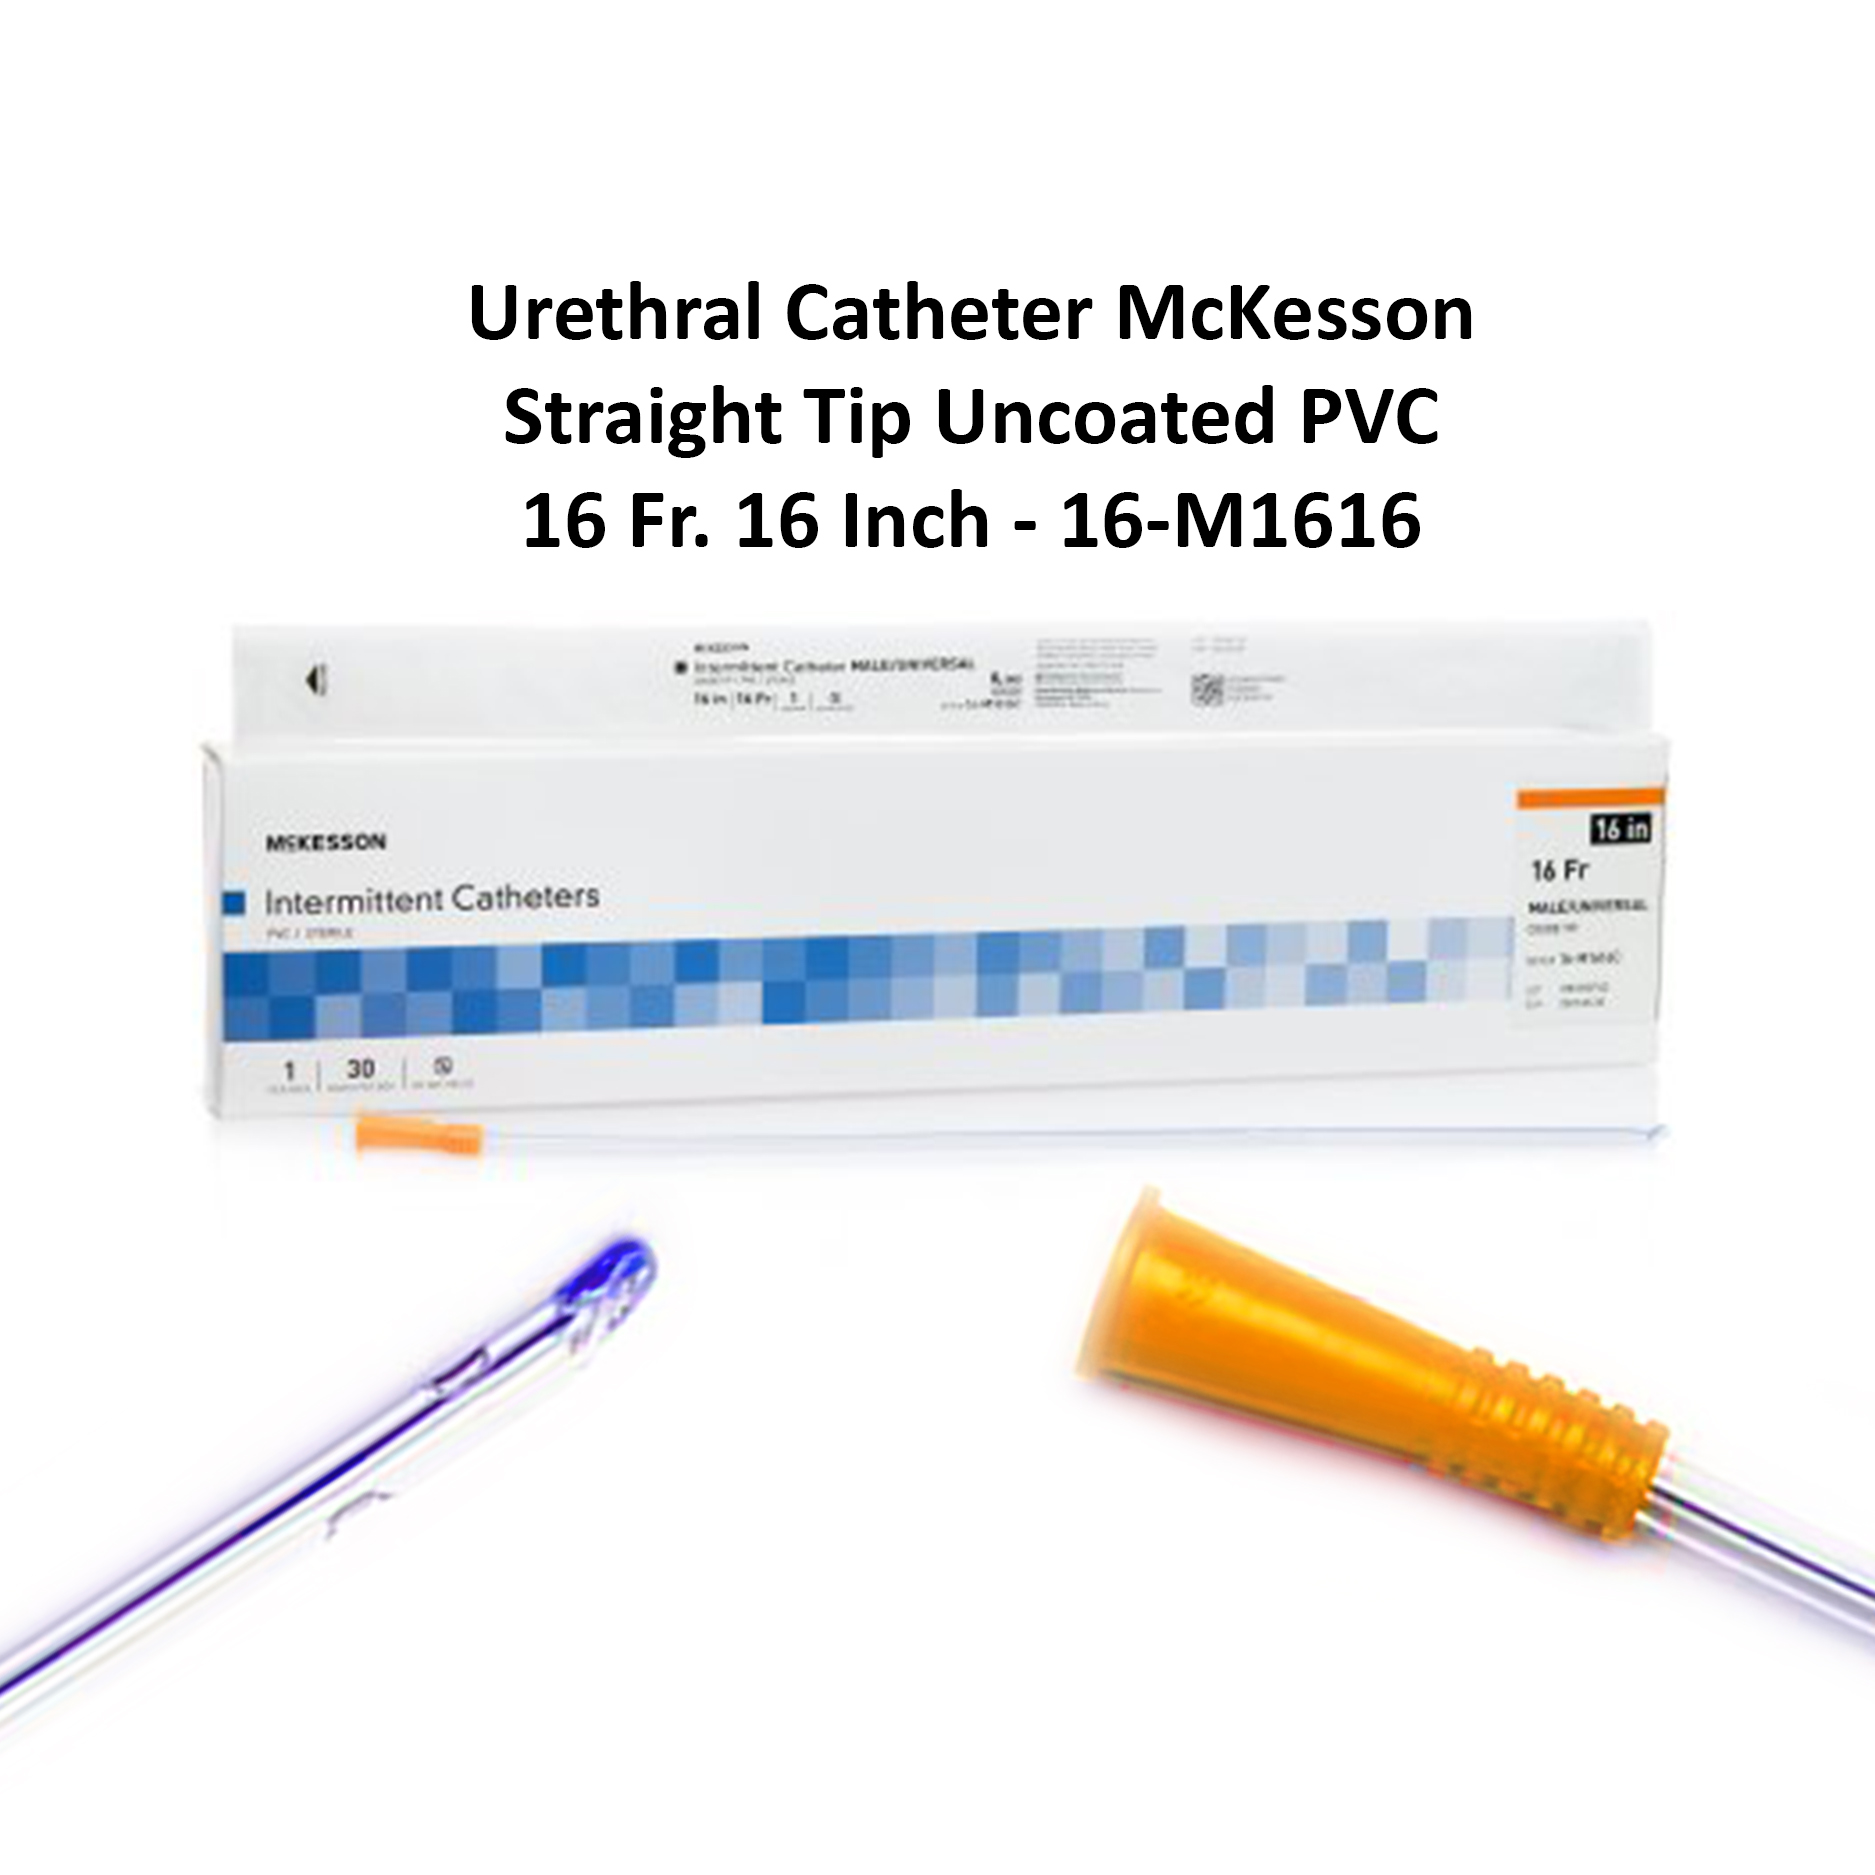 Urethral Catheter McKesson Straight Tip Uncoated PVC 16 Fr. 16 Inch - 16-M1616